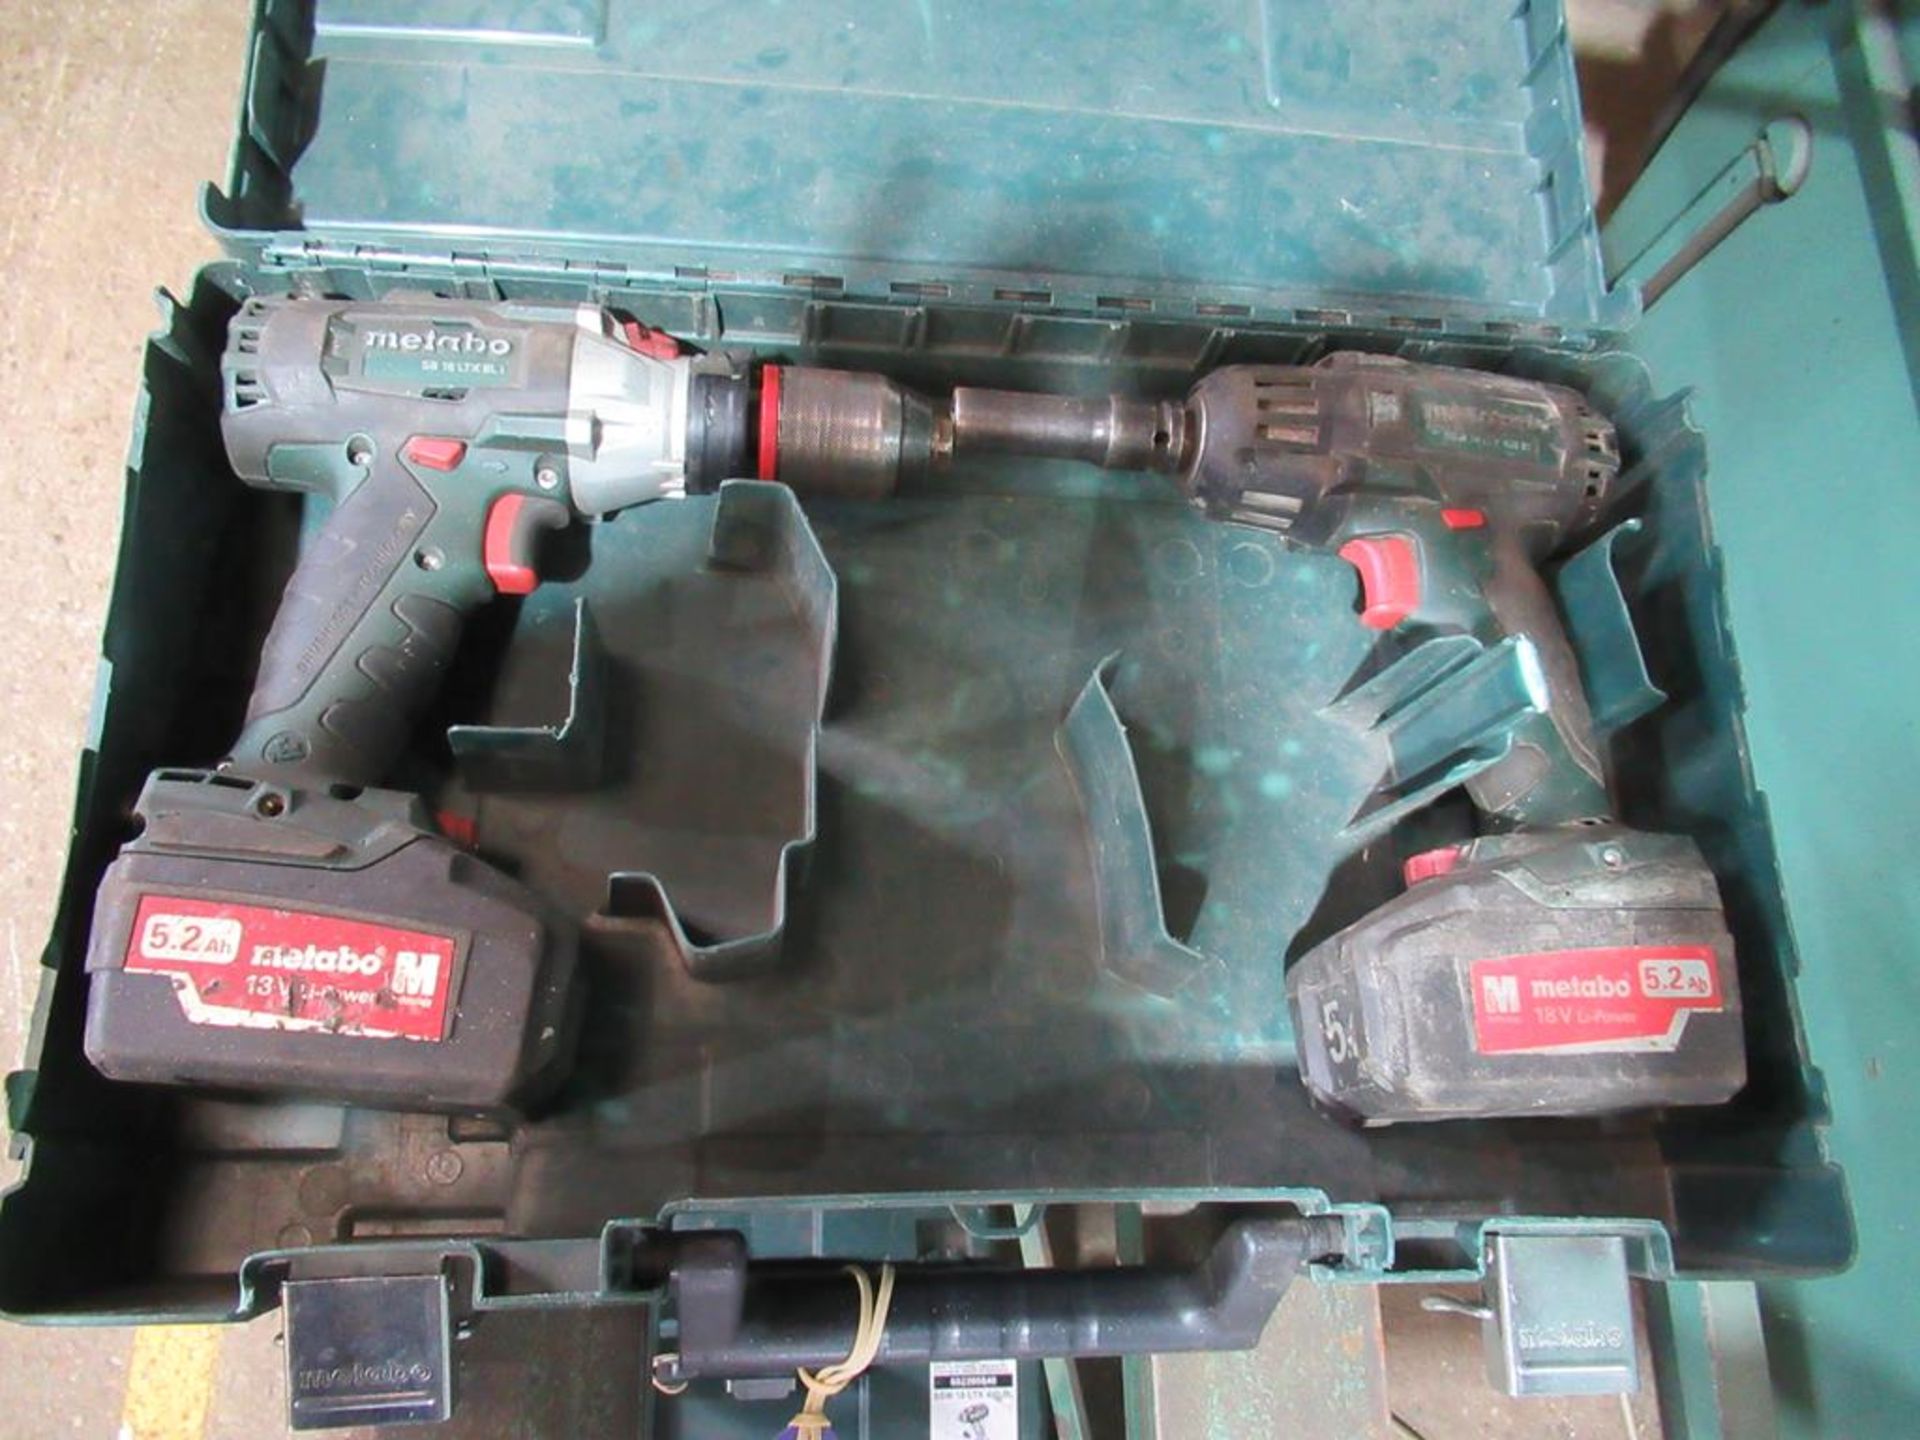 2 x Metabo battery drills